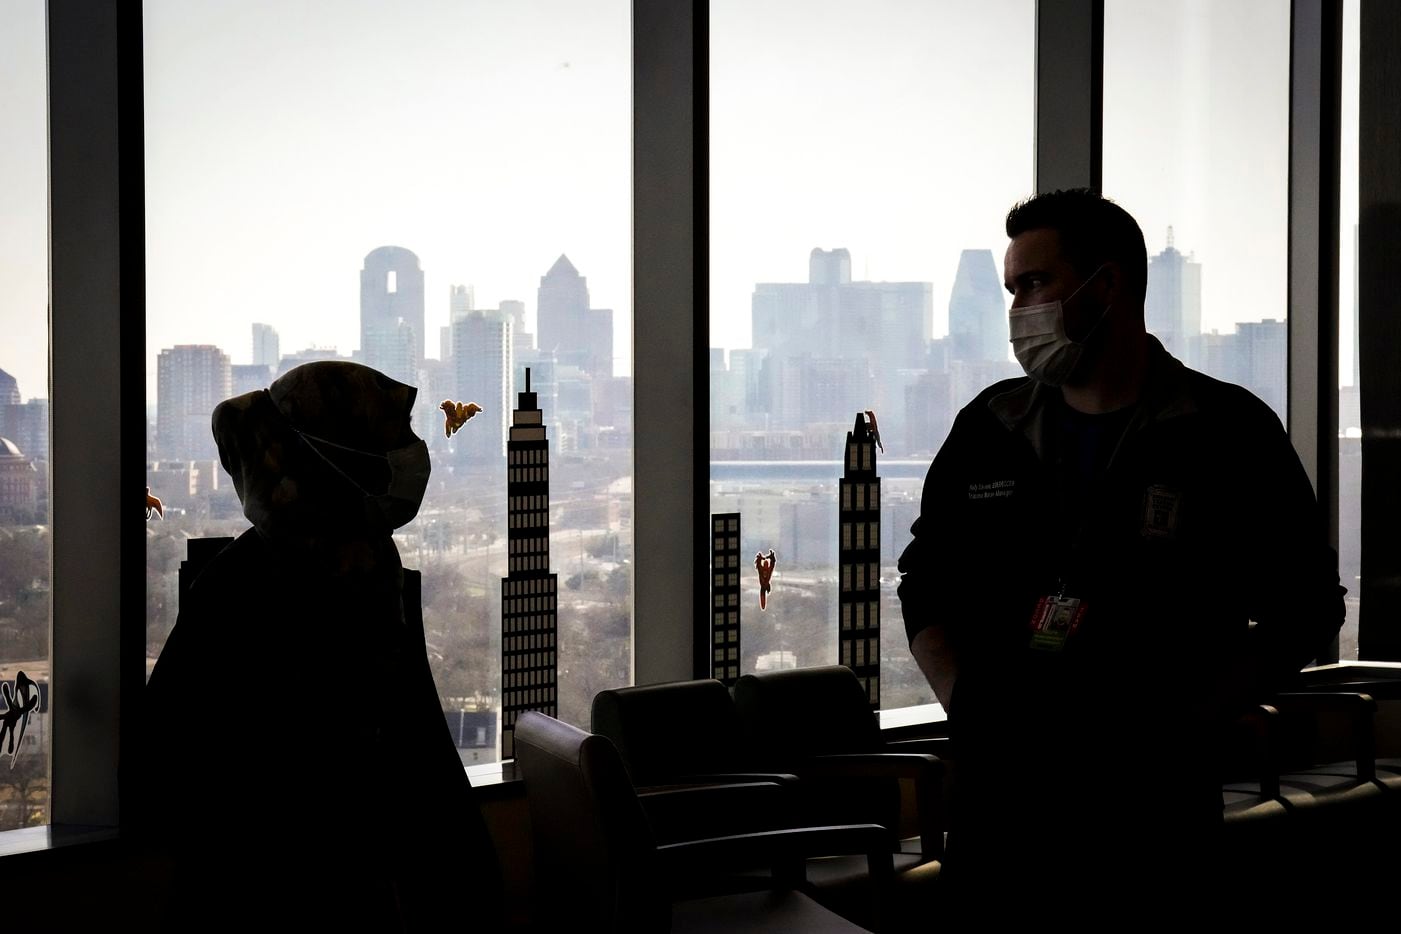 The downtown skyline is seen out the windows as nurses Kelly Stevens, unit manager in medicine services (right), and Fara Ajani, associate manager in medicine services, talk in an empty waiting area in the COVID-19 unit.